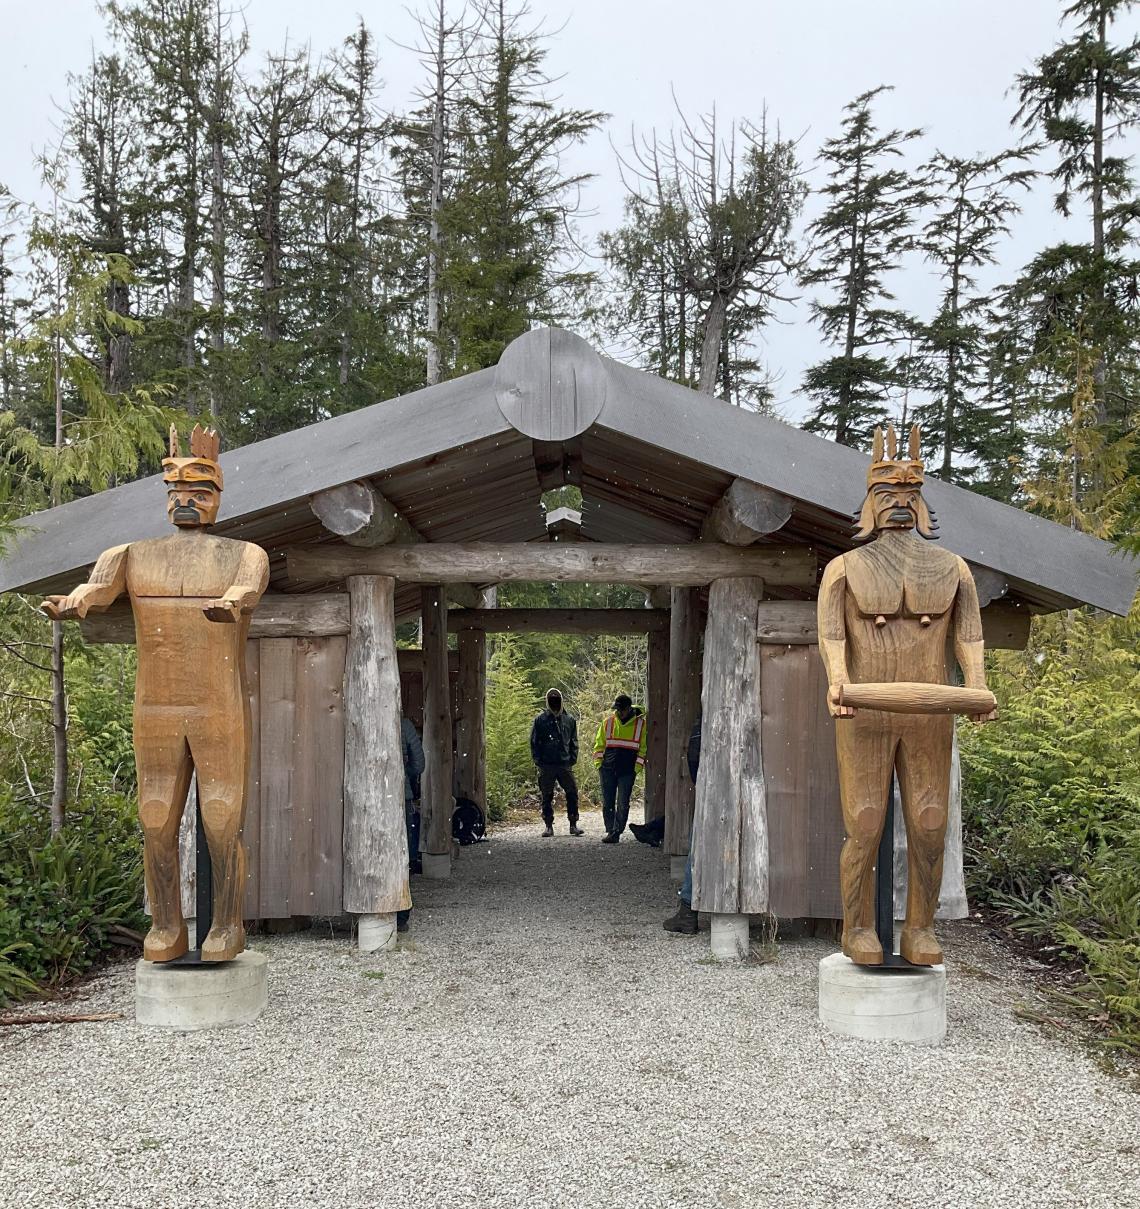 Indigenous longhouse-style building with two wooden statues outside, one of a man with his hands outstretched, one of a woman holding an item. Two students stand in the background through the other side of the building. Trees surround the scene.